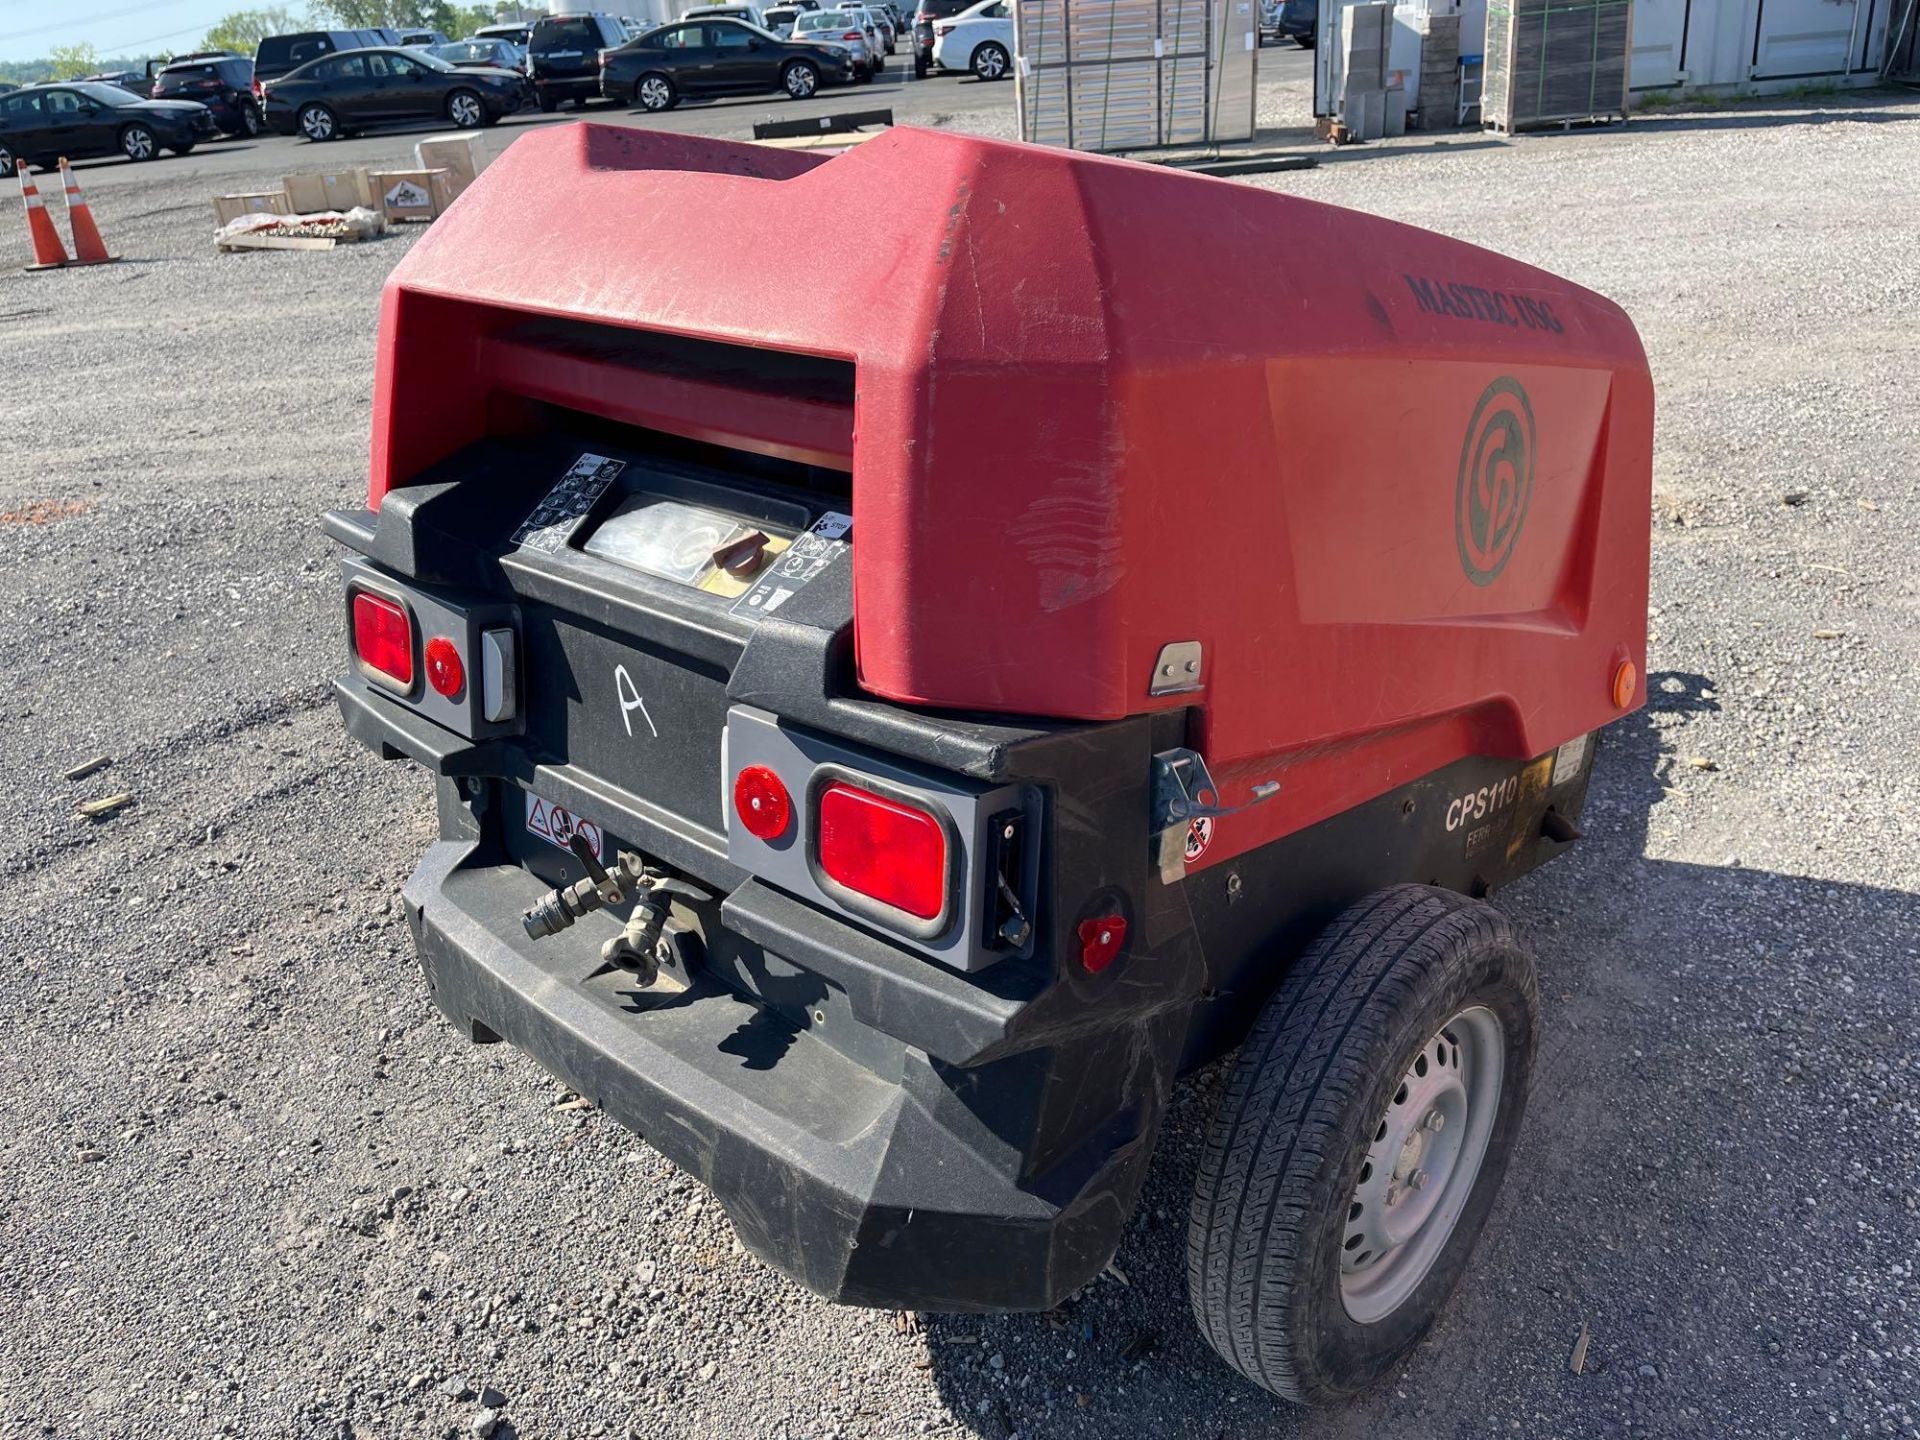 2020 CPS110 Portable Air Compressor - Image 3 of 14